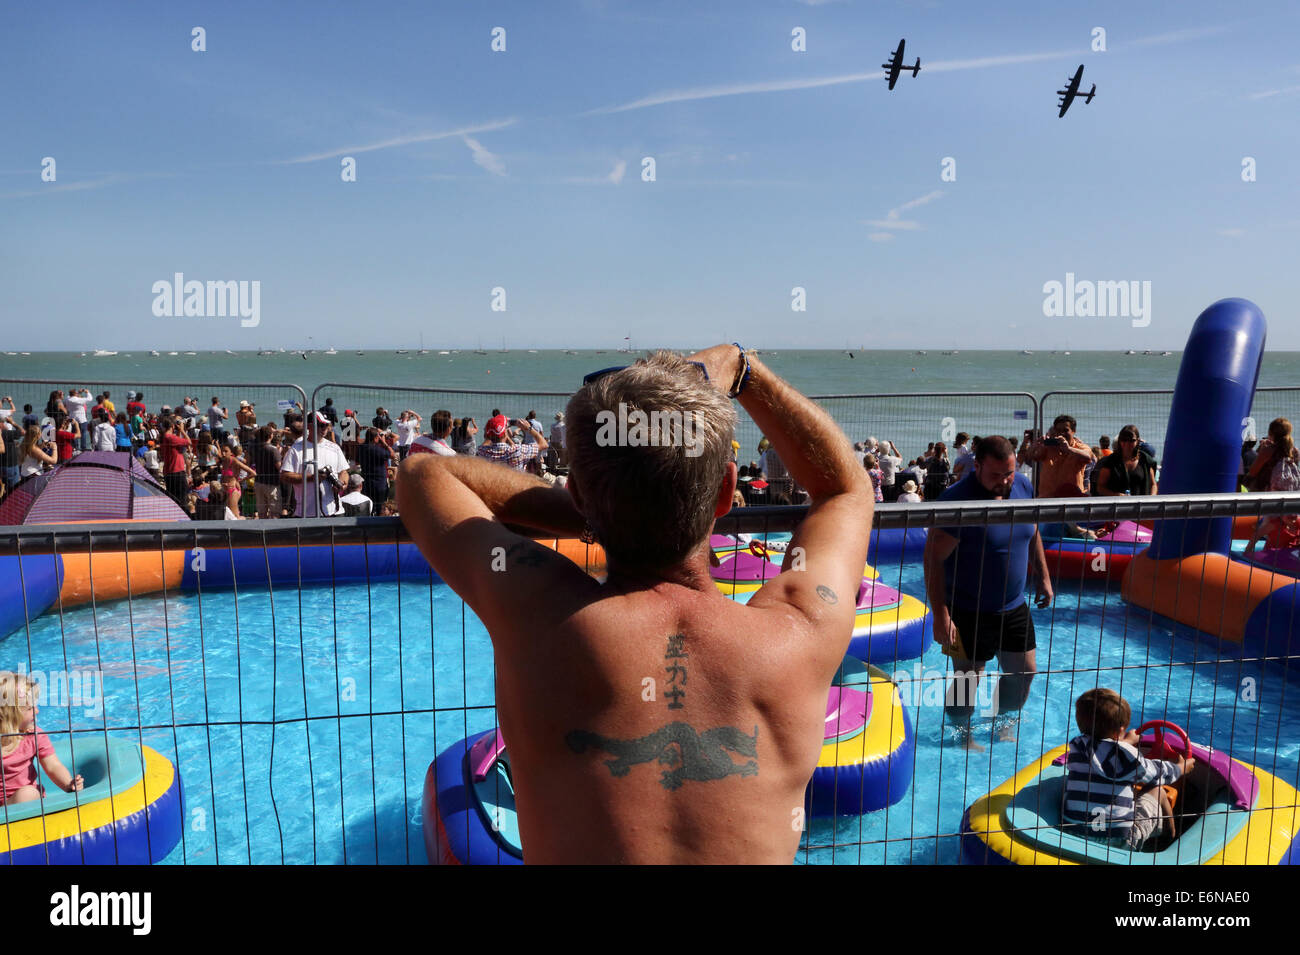 Crowds on the beach enjoy the sunshine during the Aibourne air display in Eastbourne, Sussex, England,  Photo : Pixstory / Alamy Stock Photo